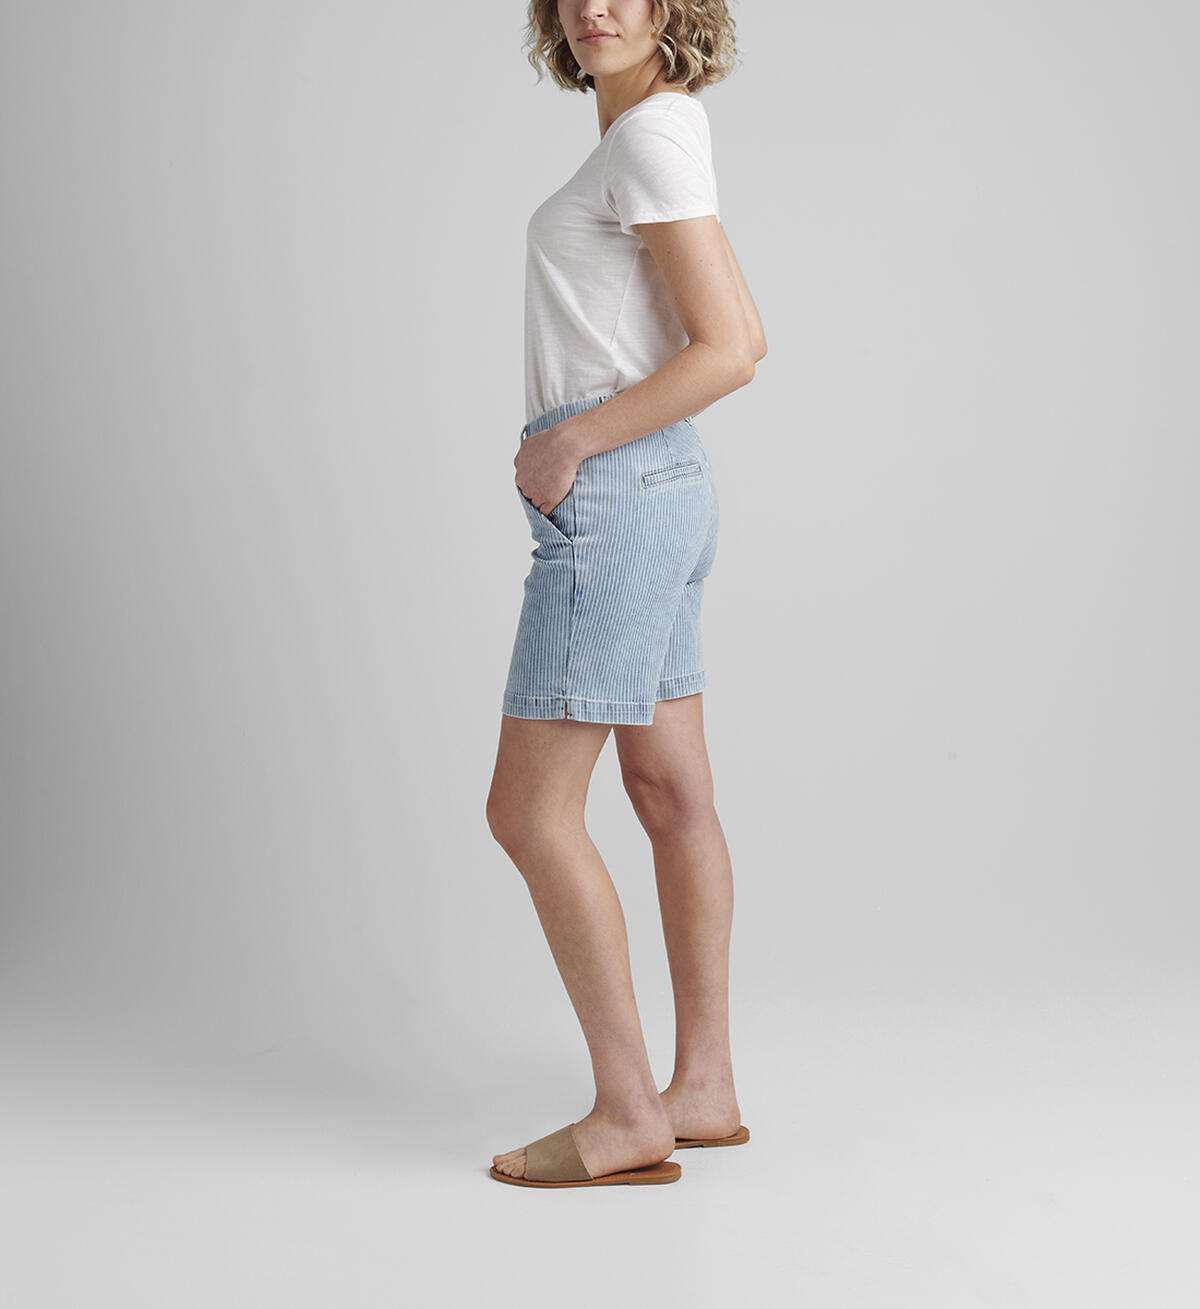 Maddie Mid Rise 8-inch Pull-On Short Petite, , hi-res image number 2